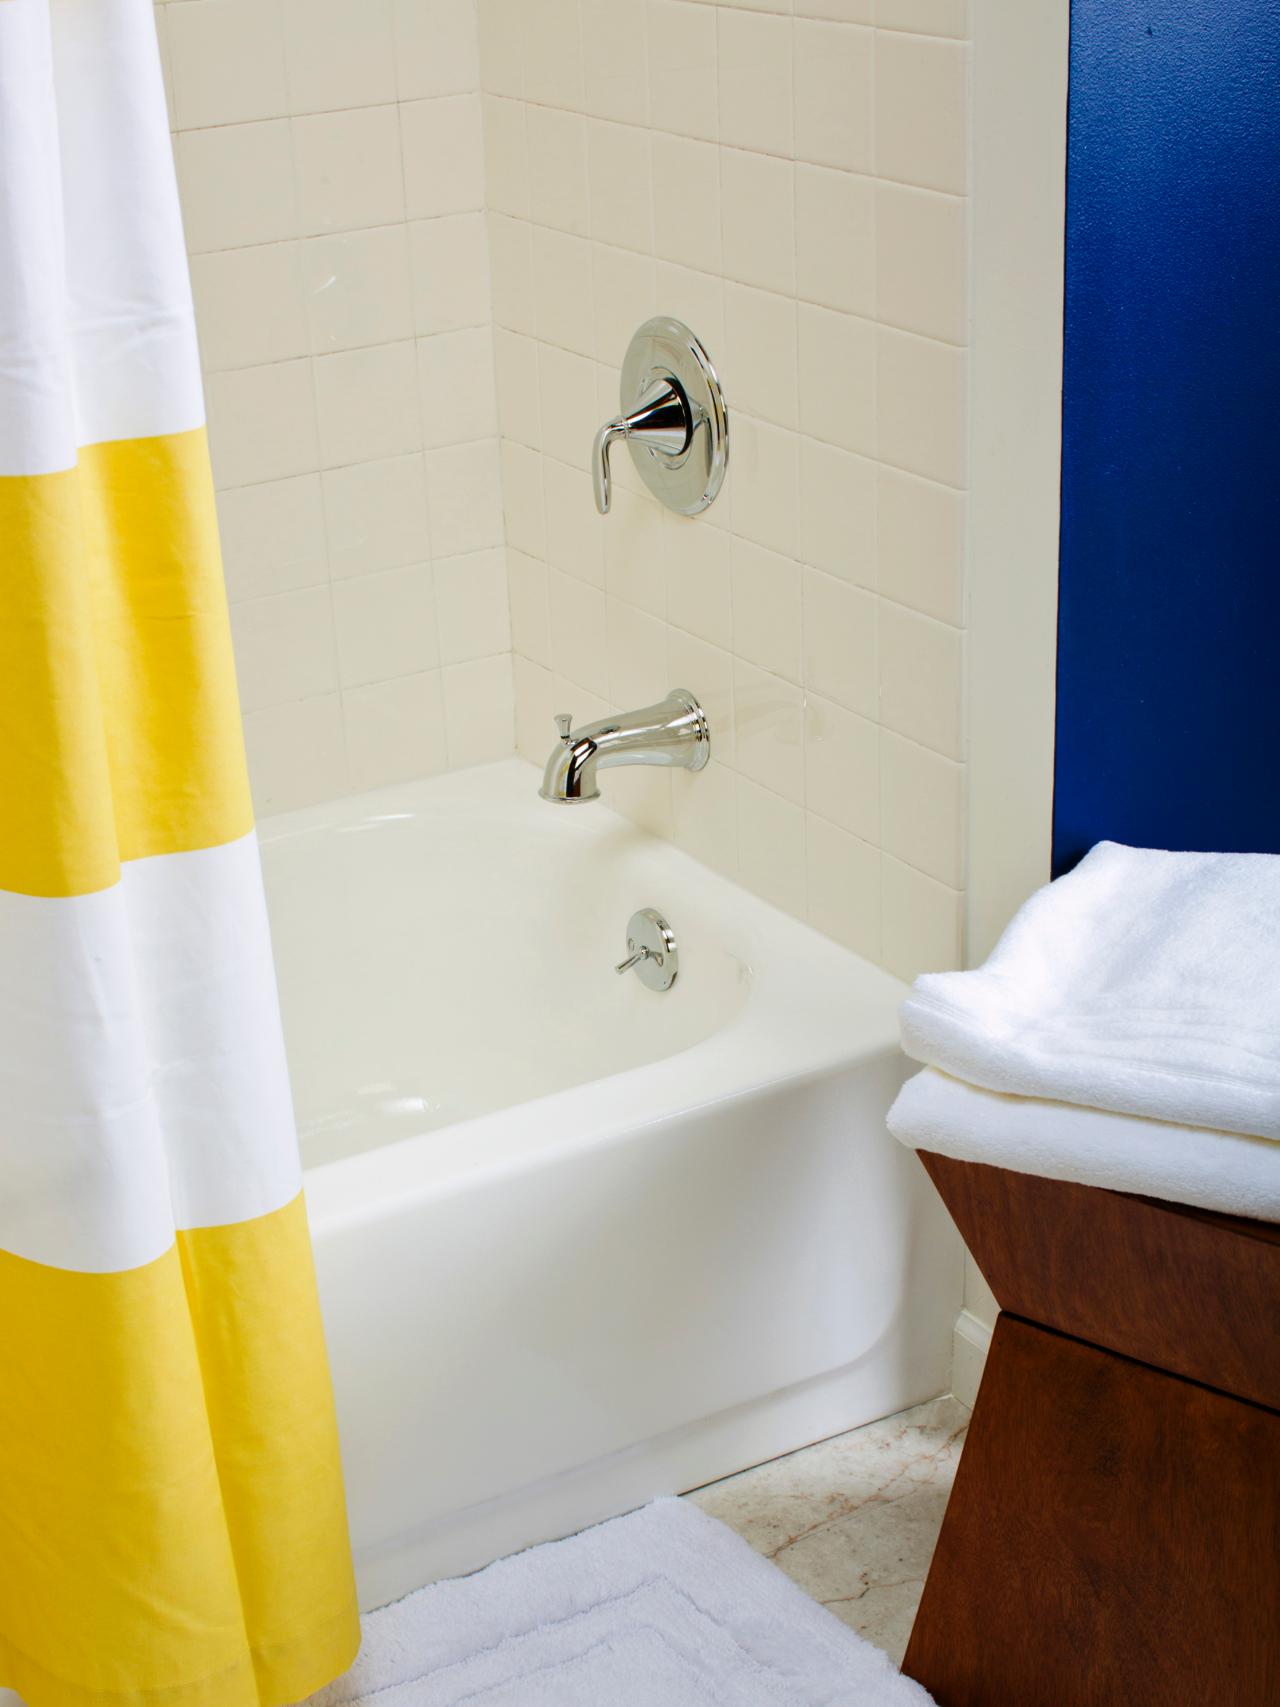 Tips From the Pros on Painting Bathtubs and Tile